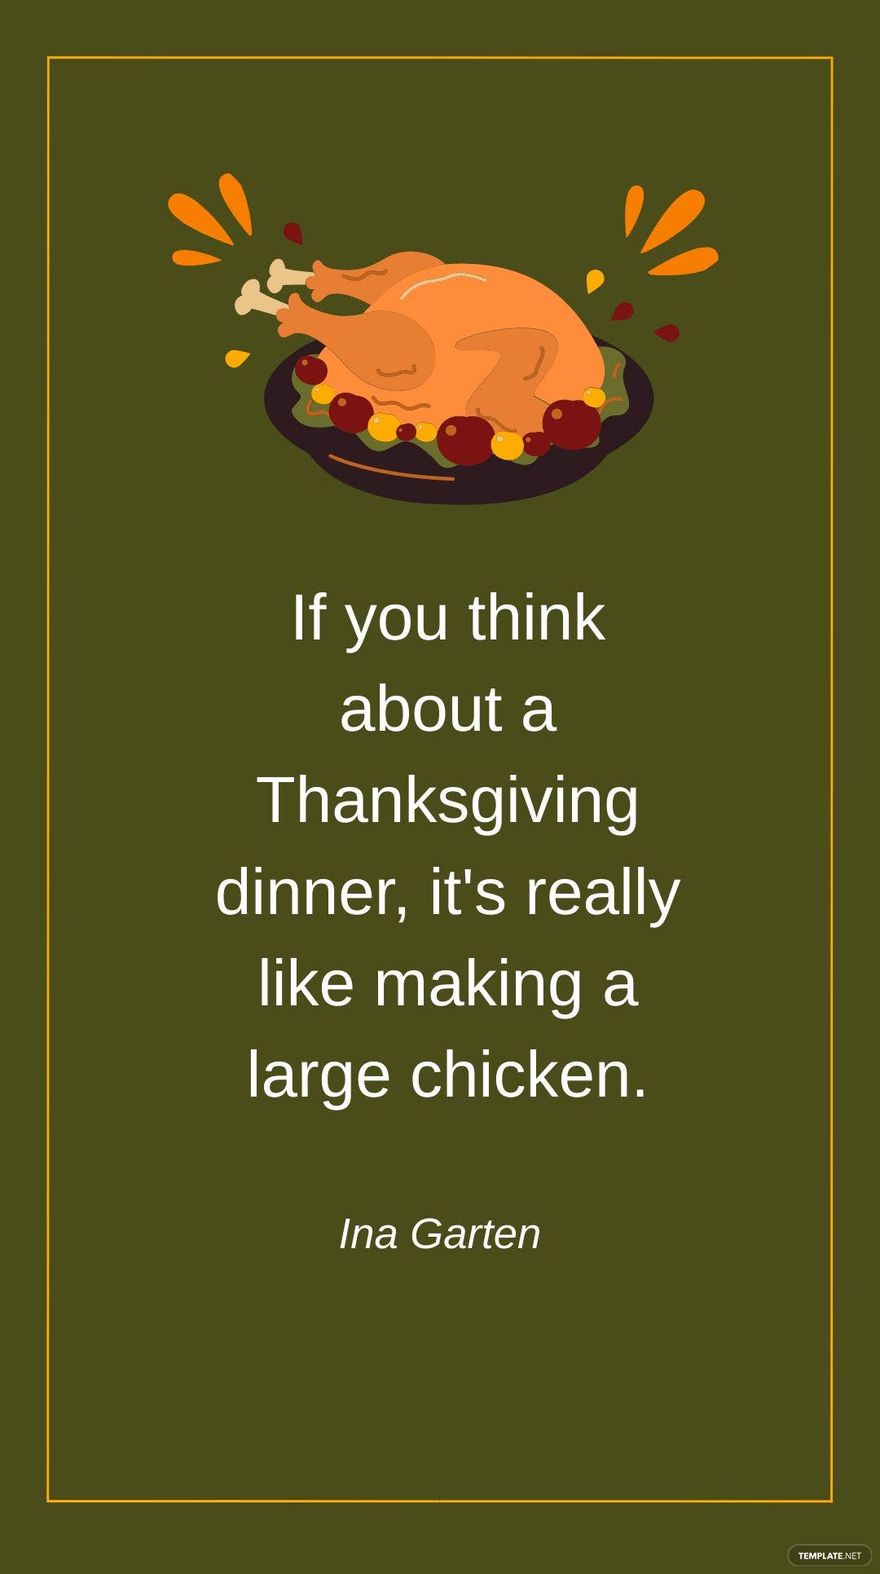 Free Ina Garten - If you think about a Thanksgiving dinner, it's really like making a large chicken.